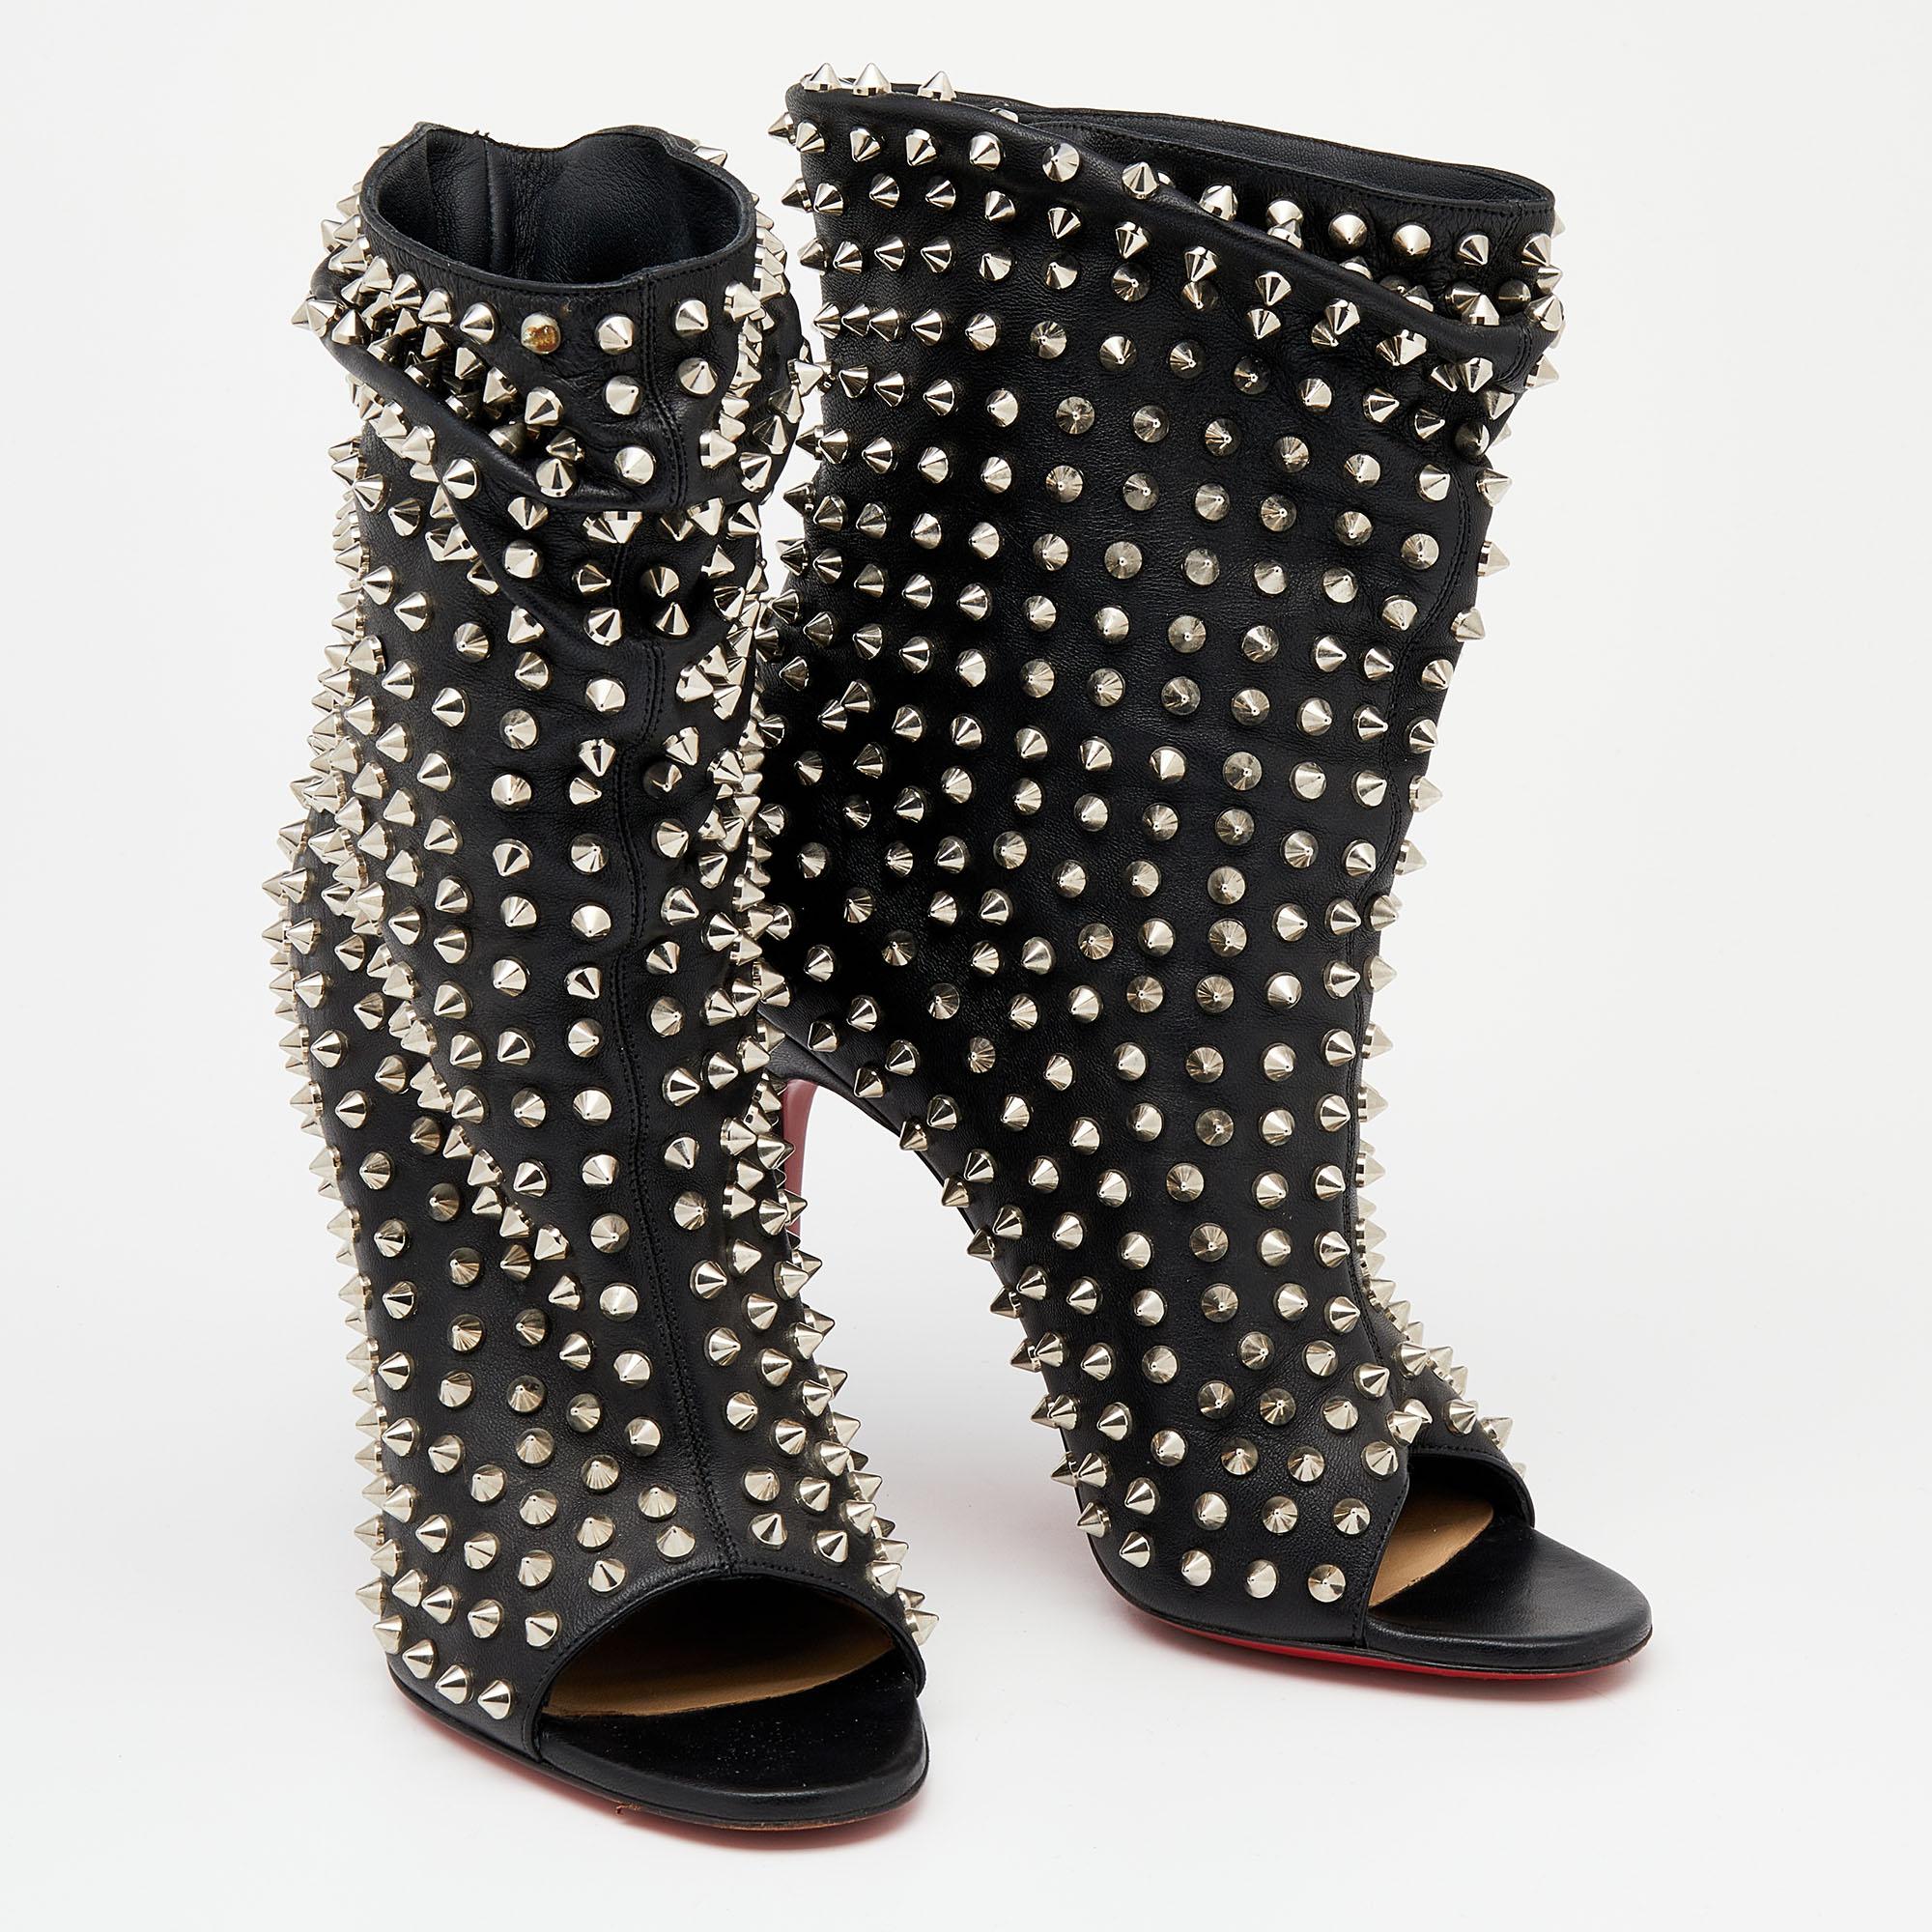 christian louboutin spiked boots